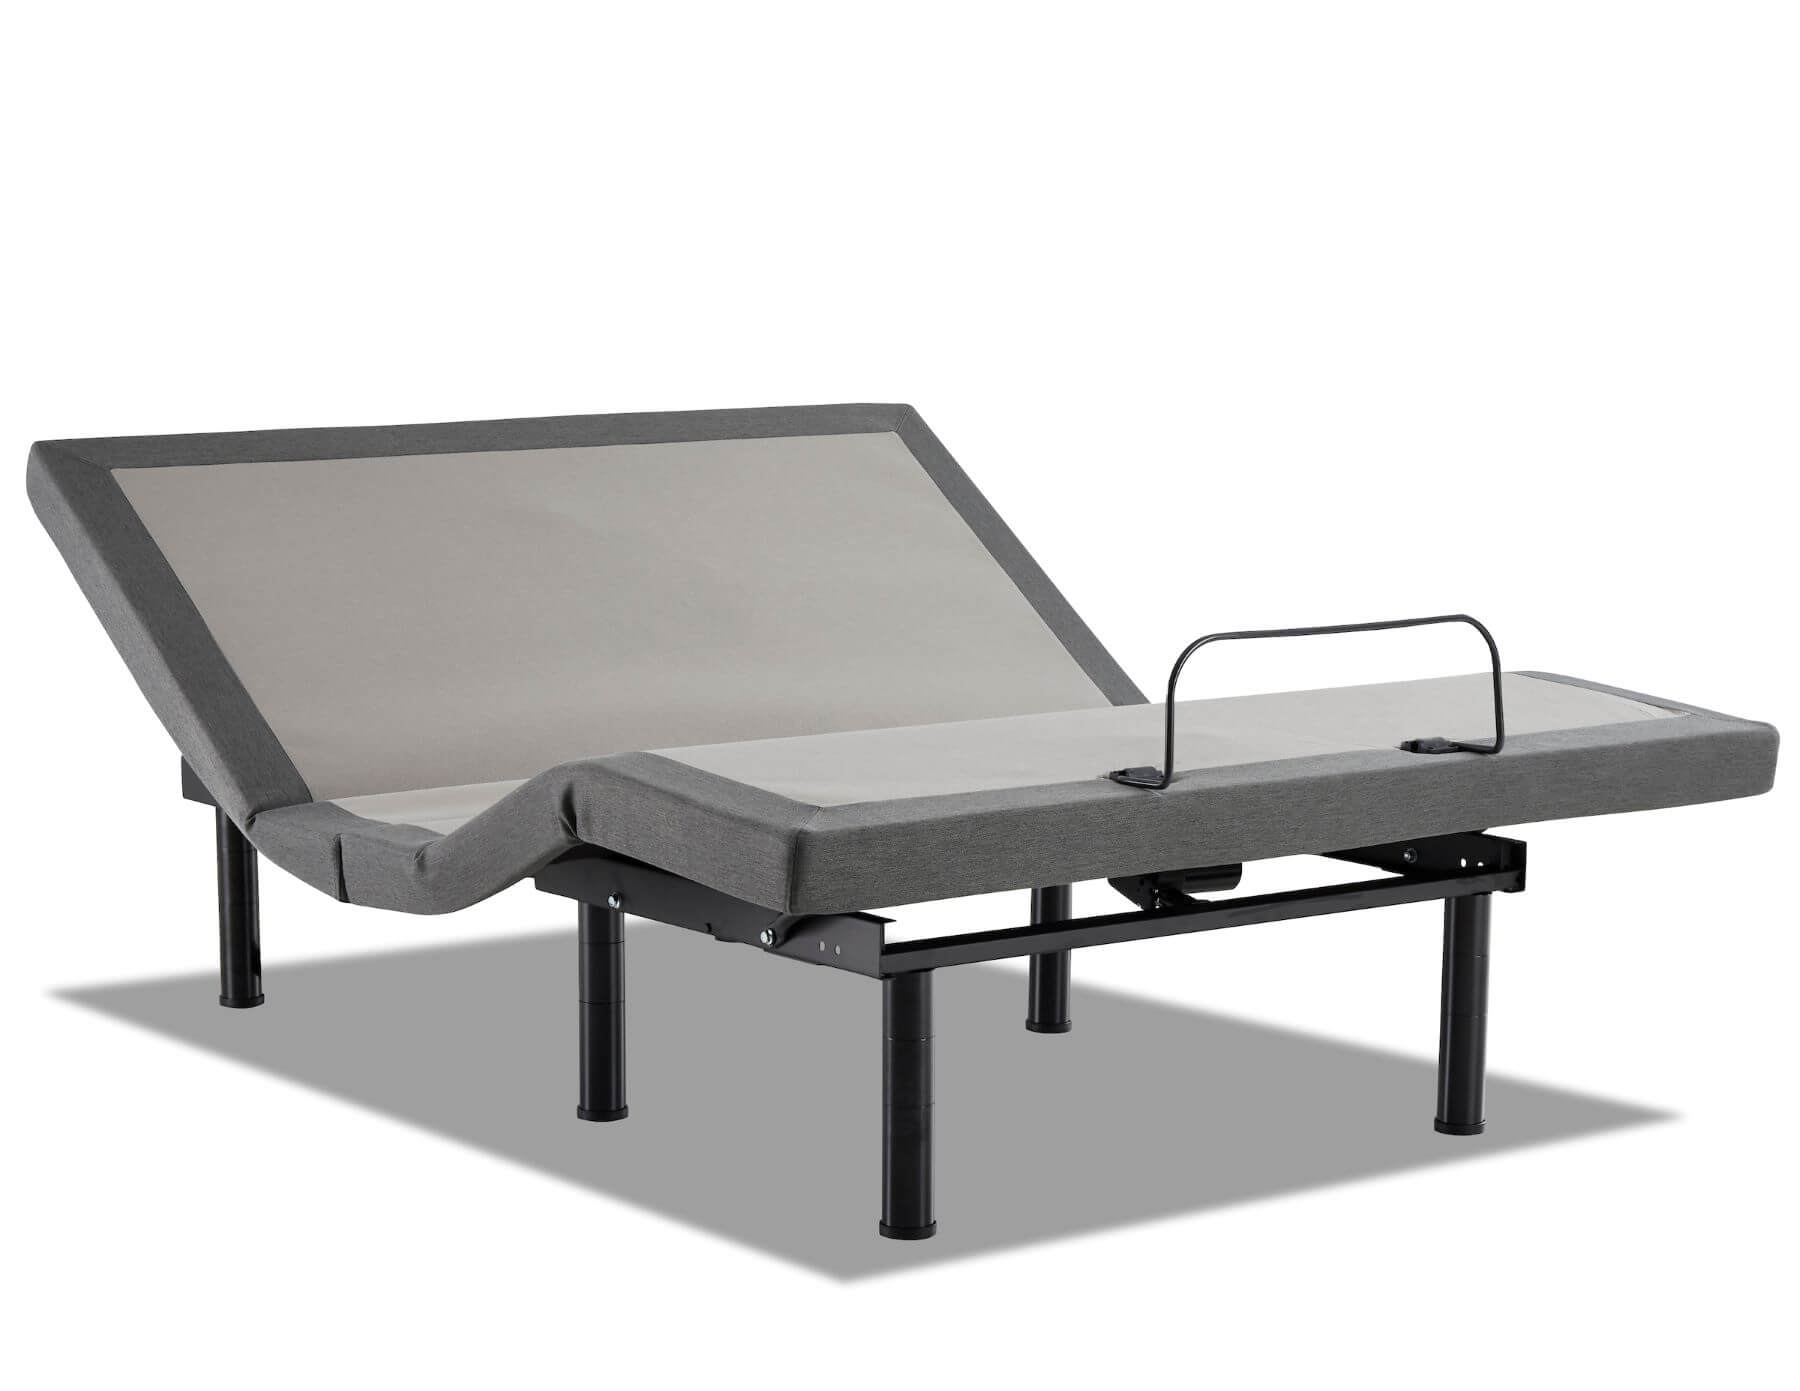 Lifestyle 3500 Adjustable Bed Base, Does An Adjustable Base Need A Bed Frame